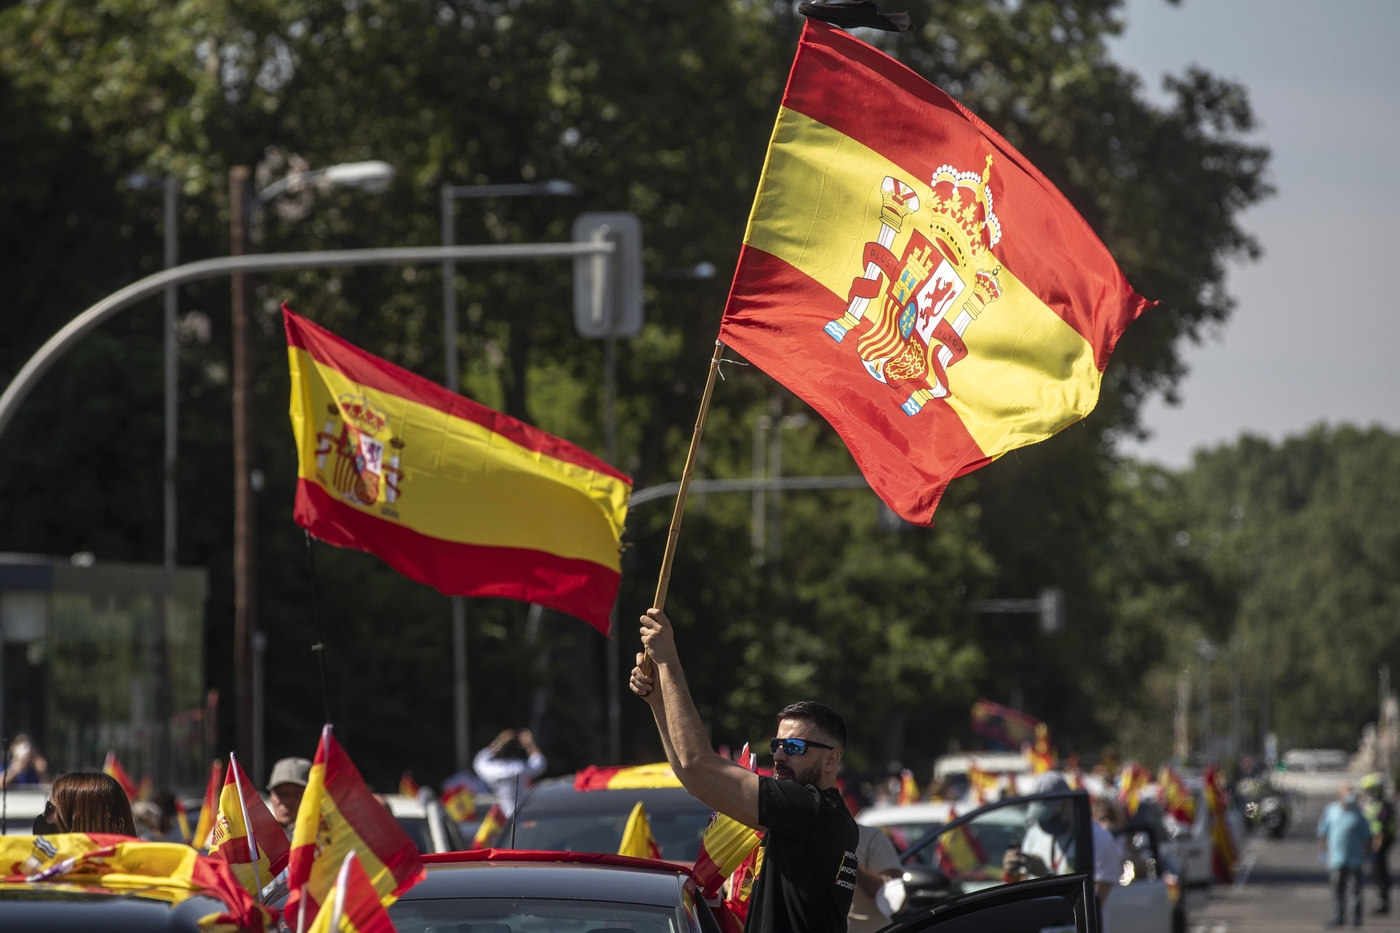 People wave Spanish flags during a drive-in protest organised by Spain's far-right party Vox against the Spanish government's handling of the nation's coronavirus outbreak in Madrid, Spain Saturday, May 23, 2020. (AP Photo/Manu Fernandez)